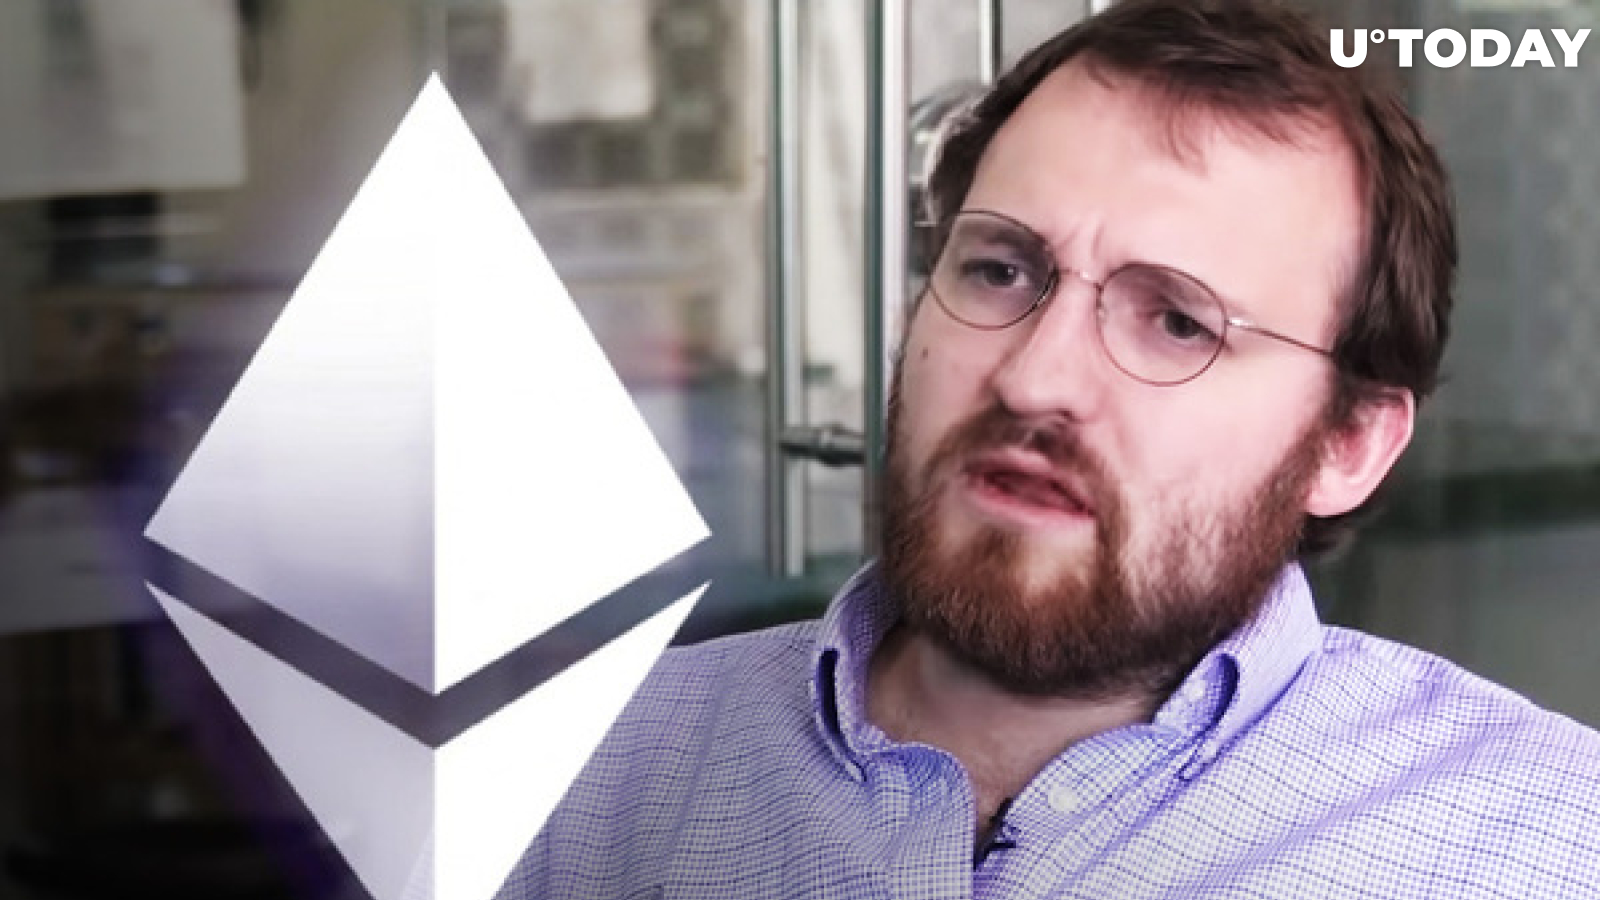 Cardano Founder Charles Hoskinson Predicts Quick Victory for Ethereum Against Bitcoin